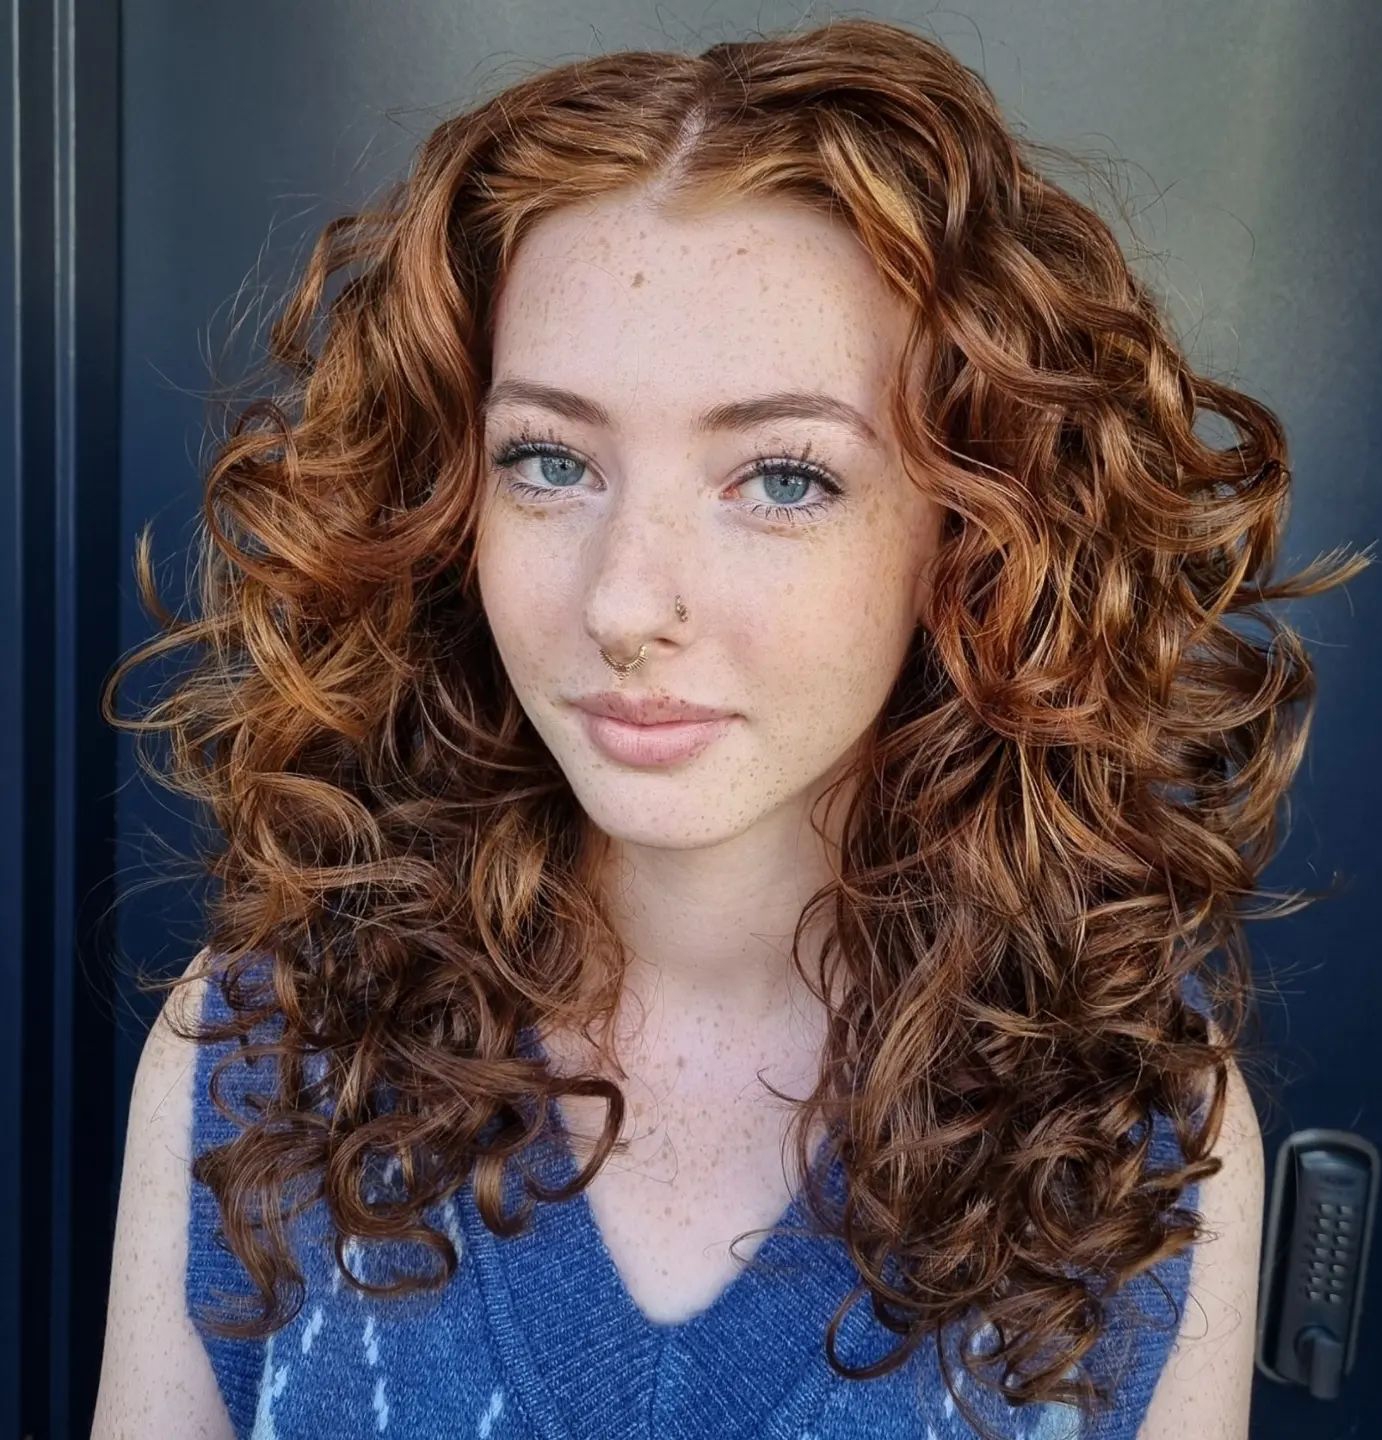 Butterfly Haircut on Curly Copper Hair